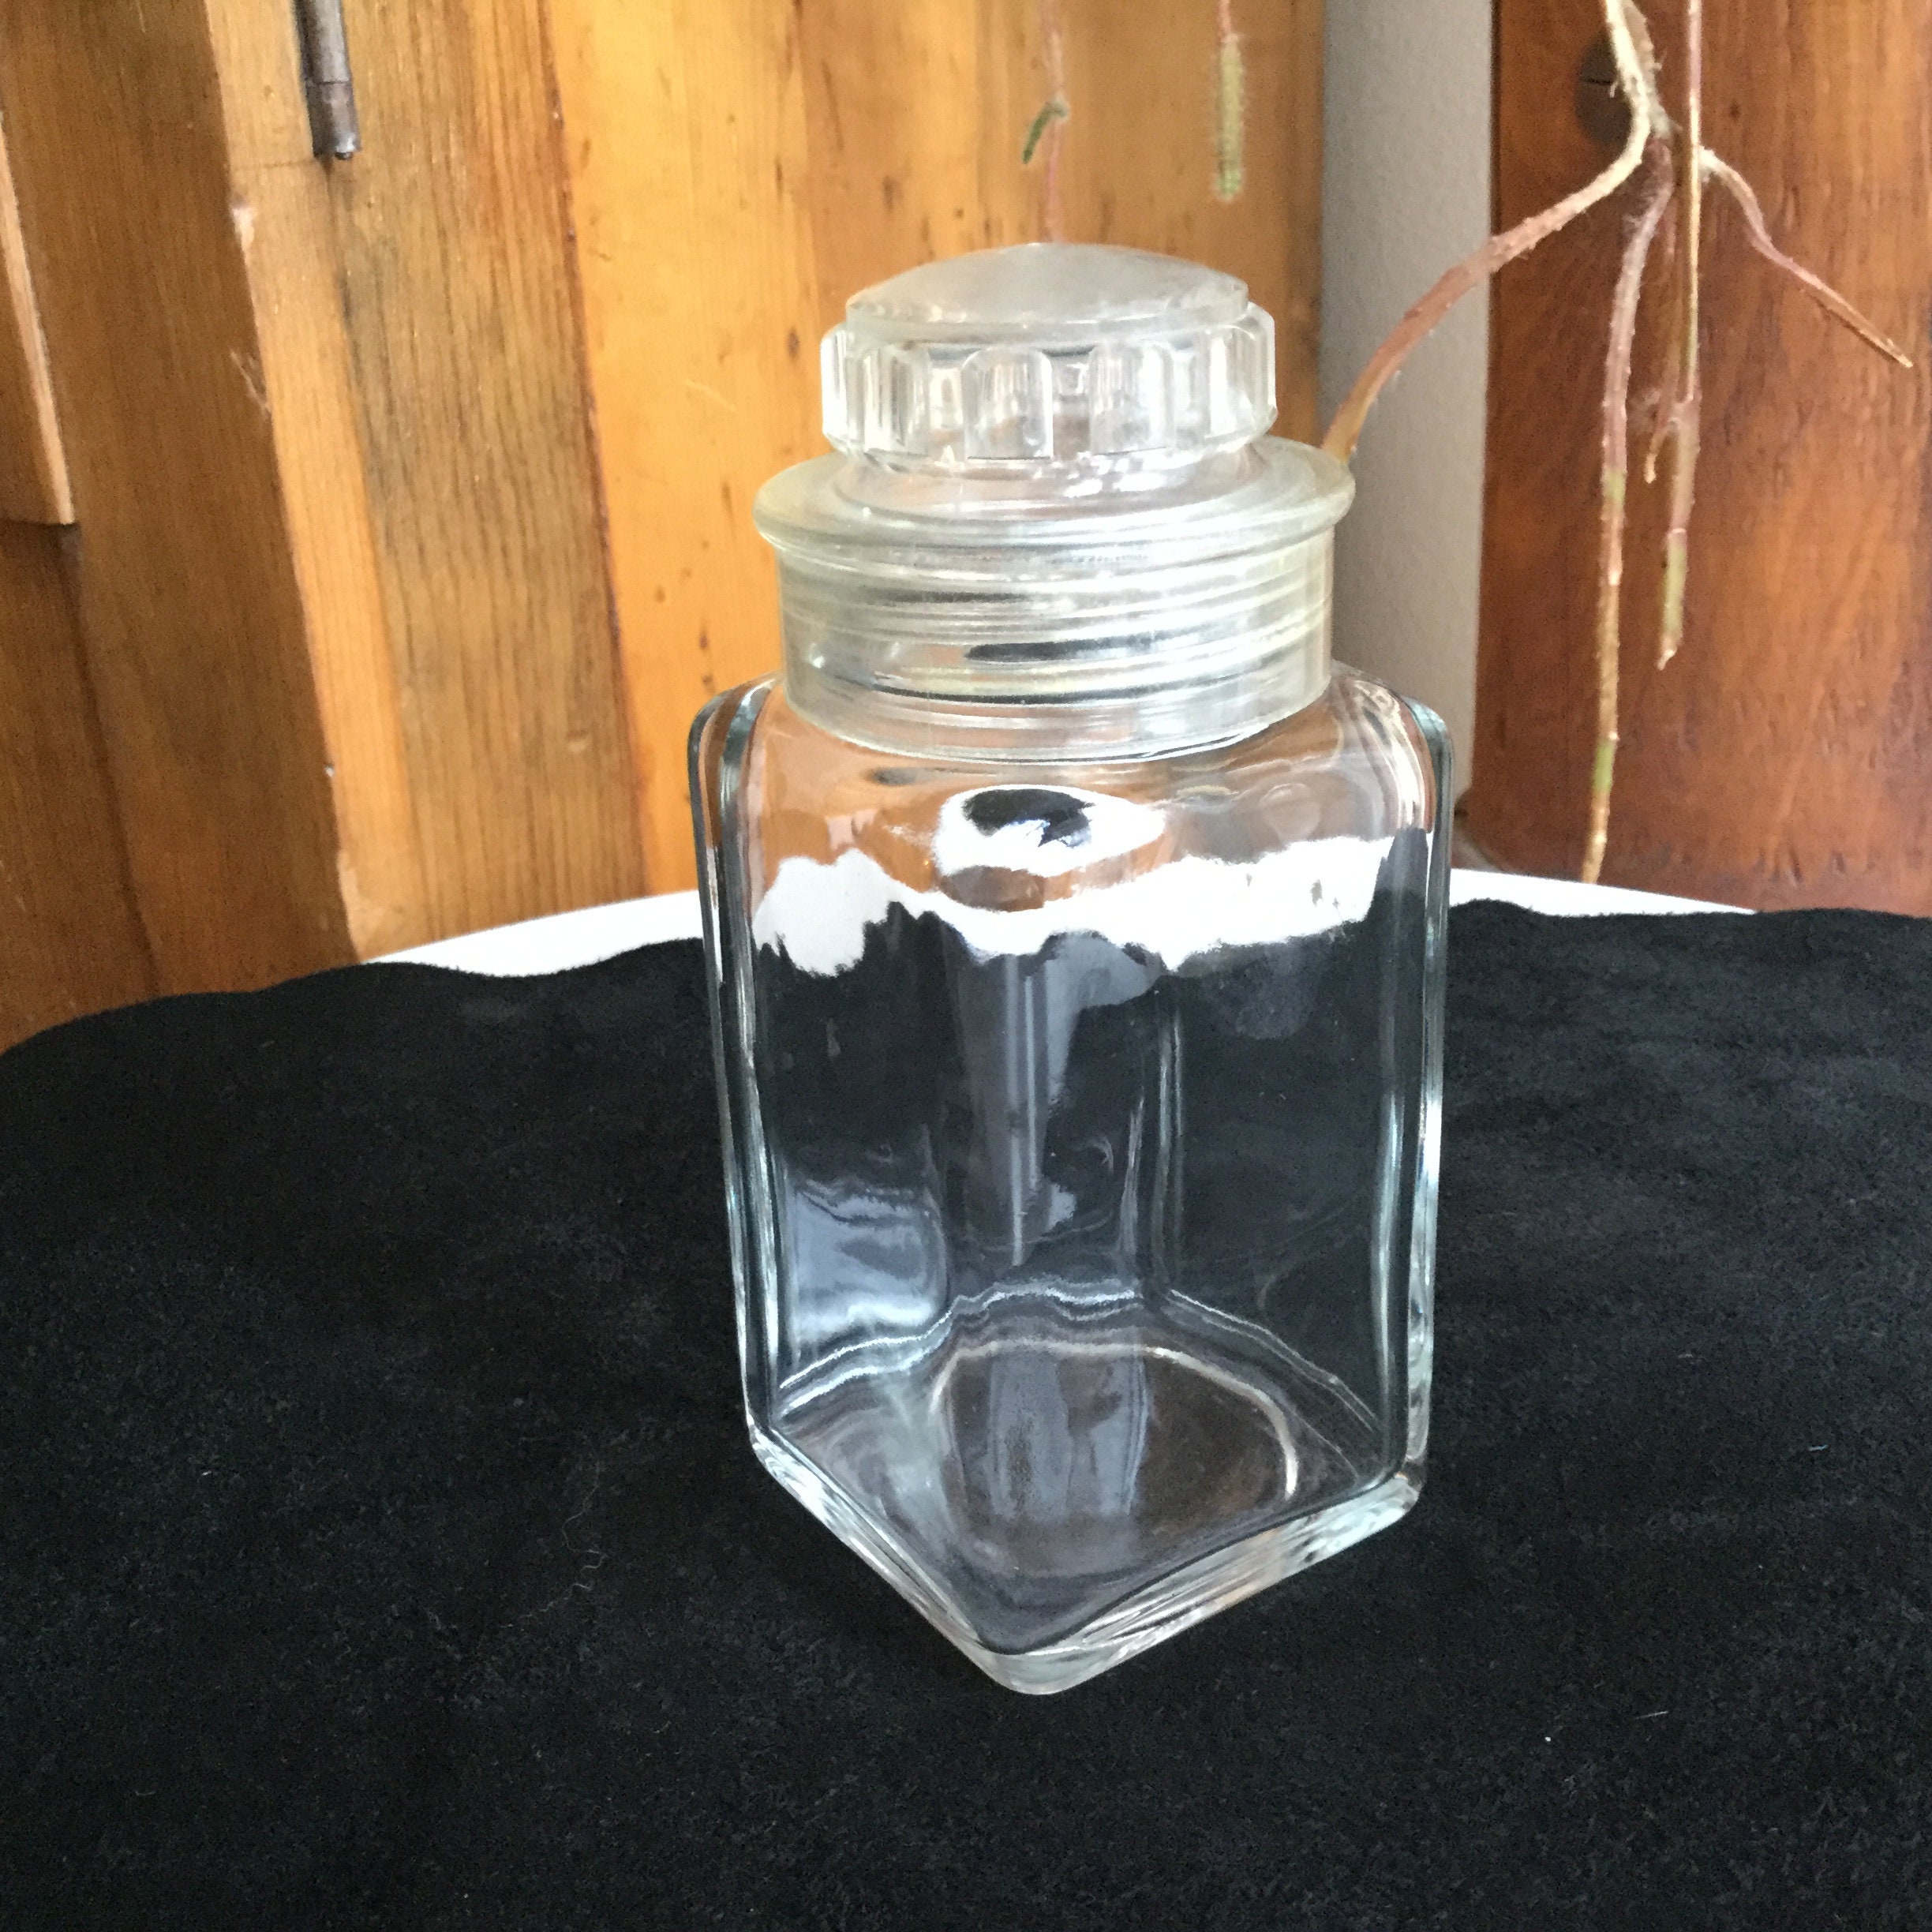 Kitchentoolz 12 Oz Square Glass Milk Jugs with Caps - Perfect Milk Container